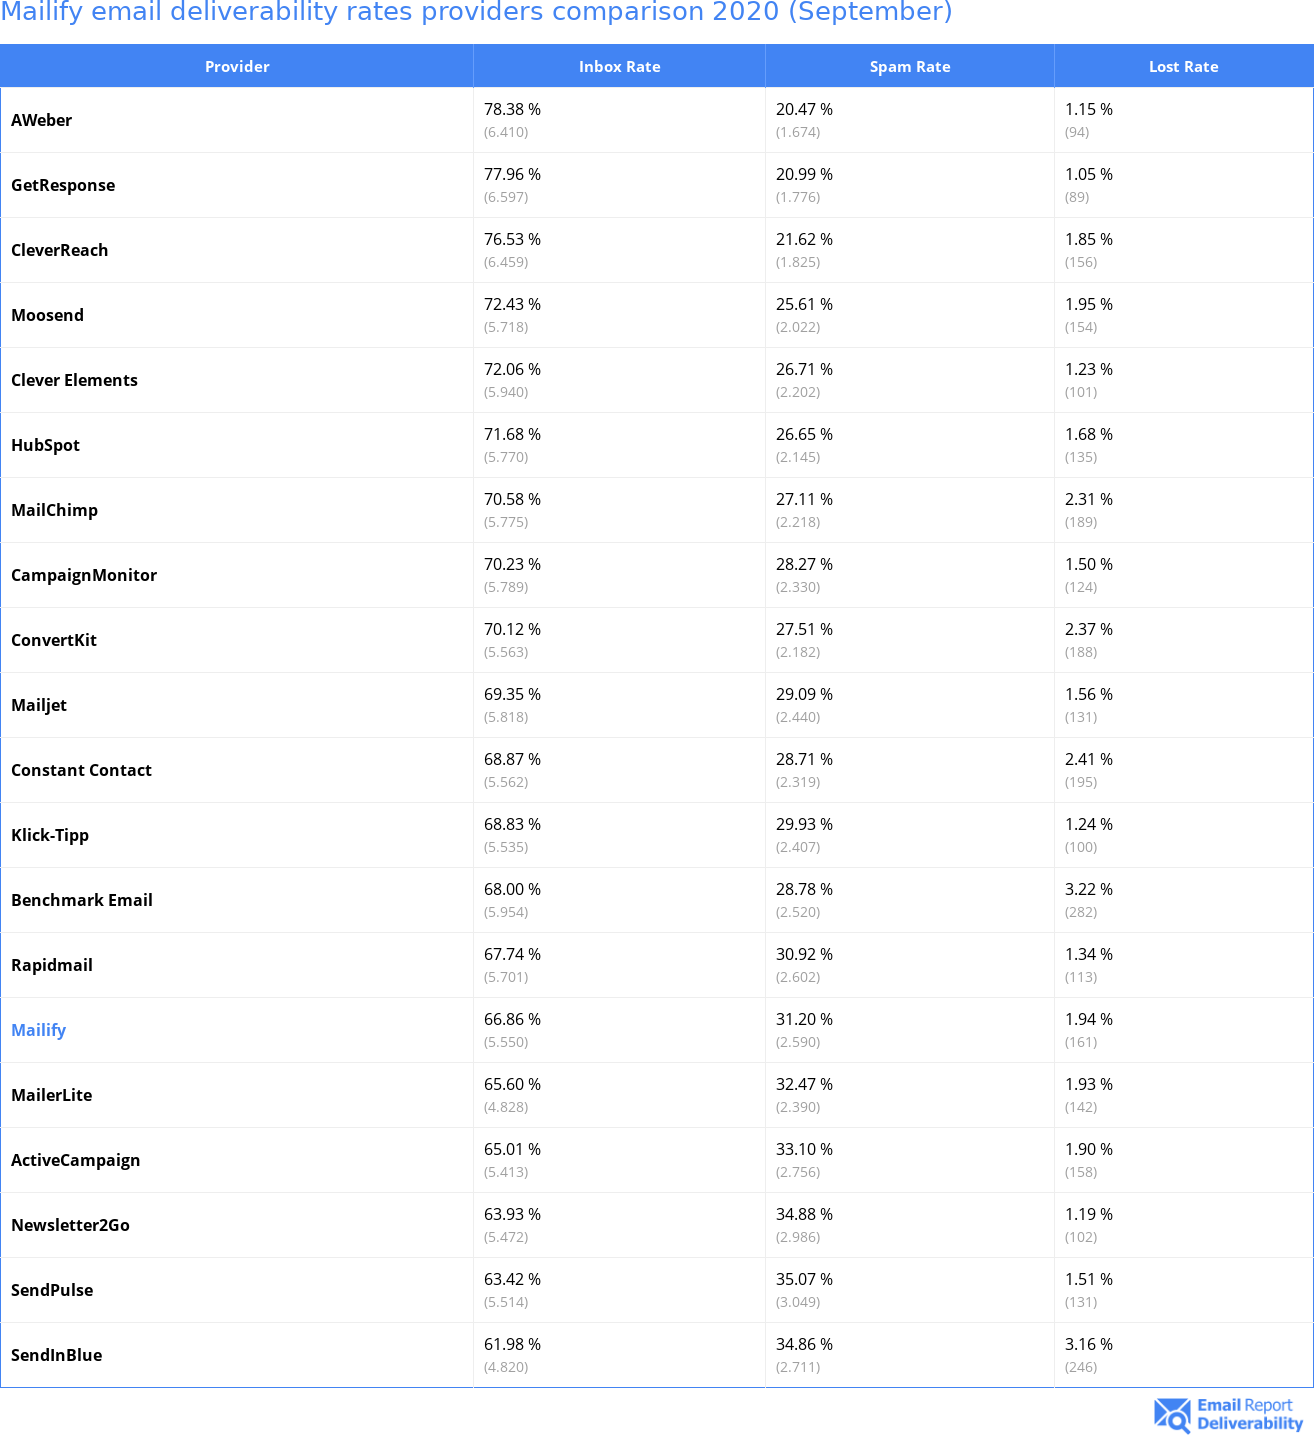 Mailify email deliverability rates providers comparison 2020 (September)